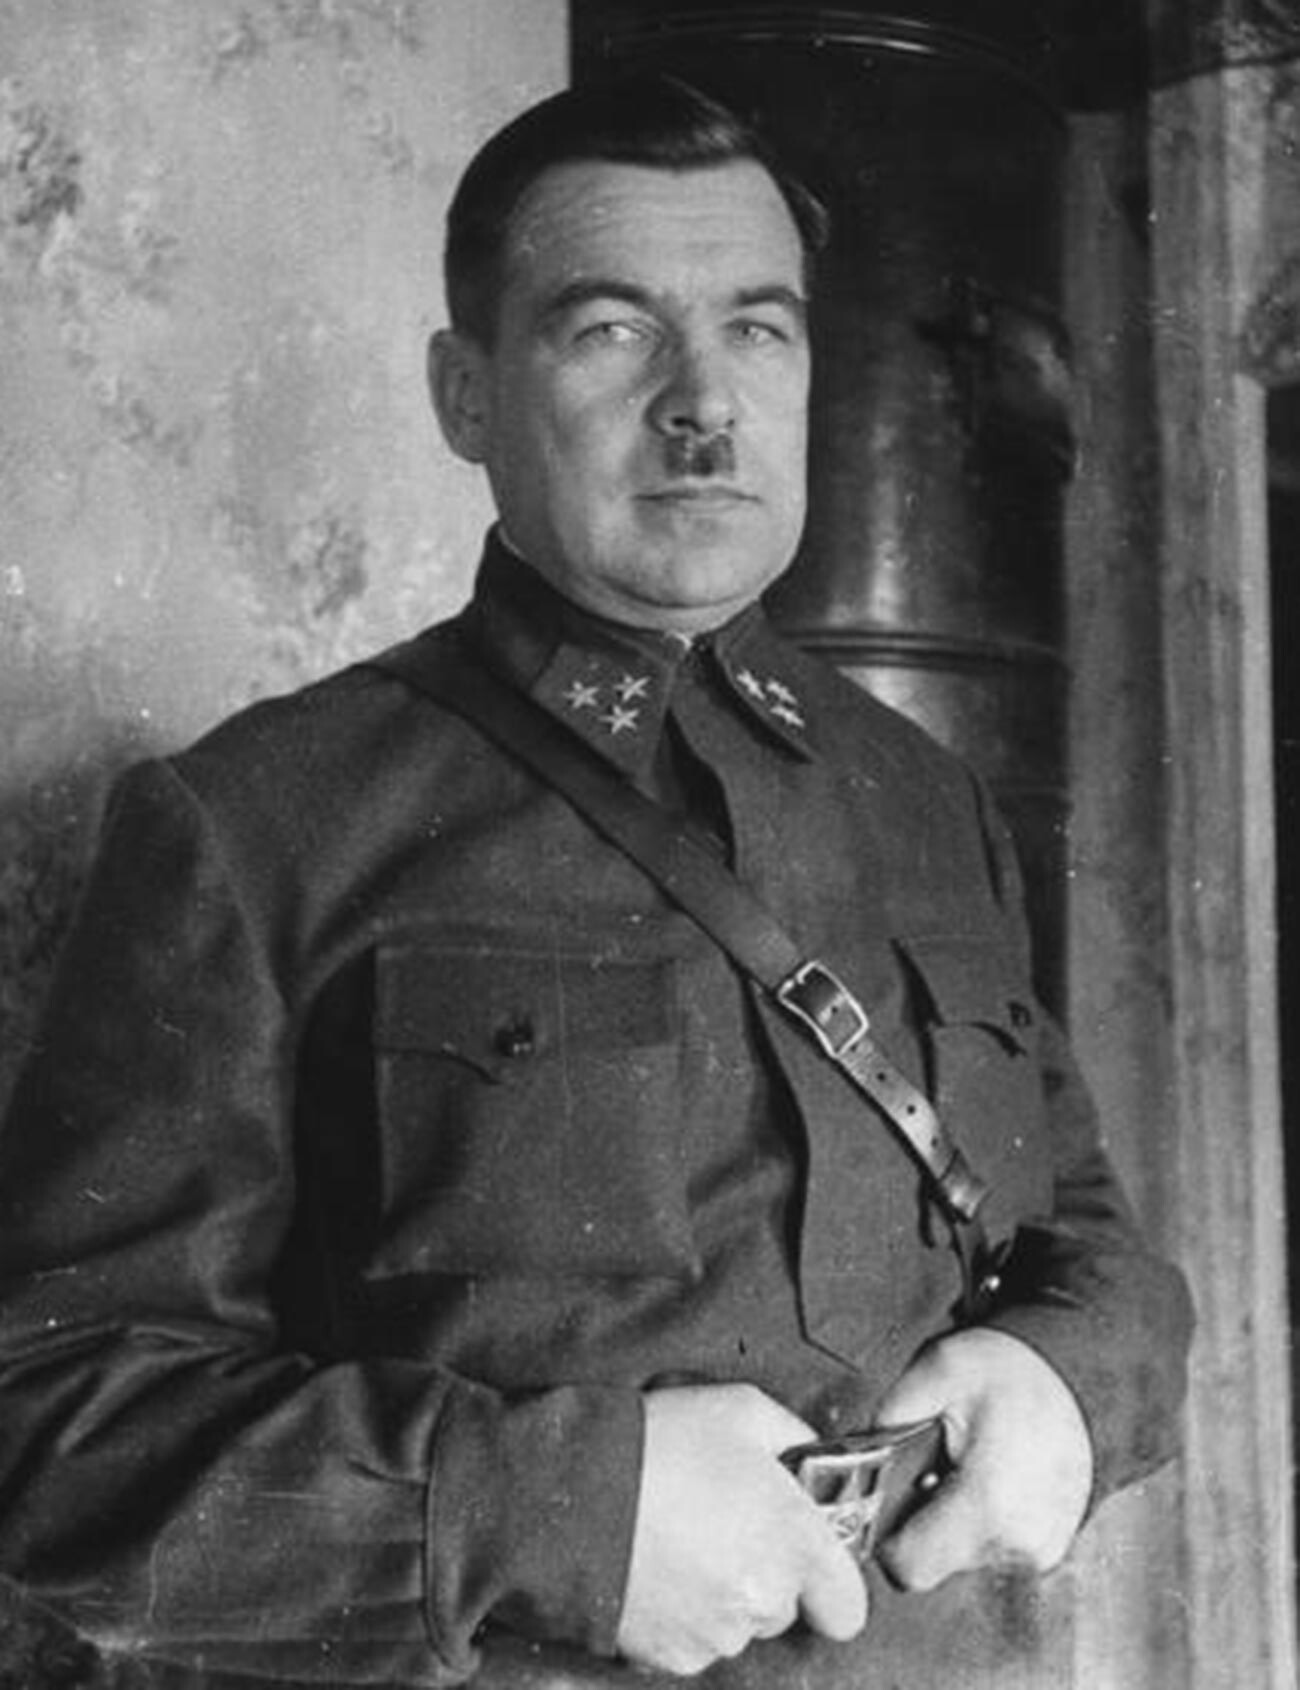 Govorov as the commander of the 5th Army.